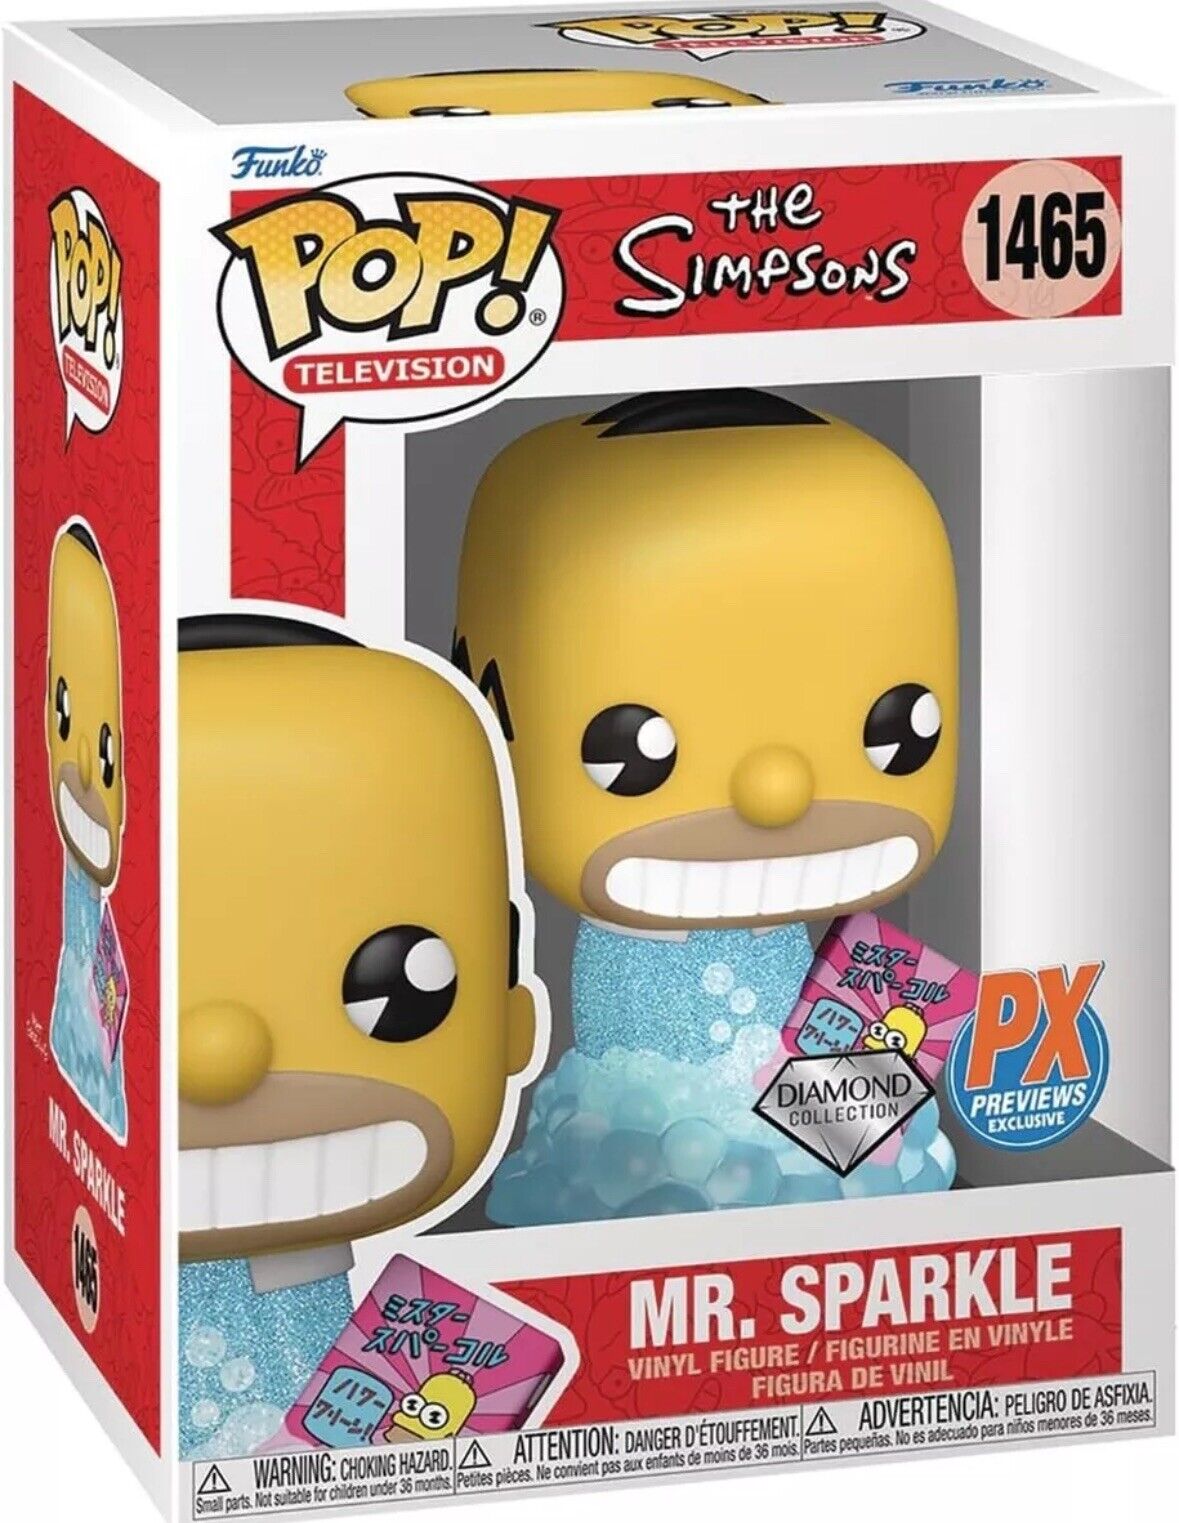 Funko Pop Simpsons Mr. Sparkles (Homer) Figure w/ Protector (PX Exclusive)